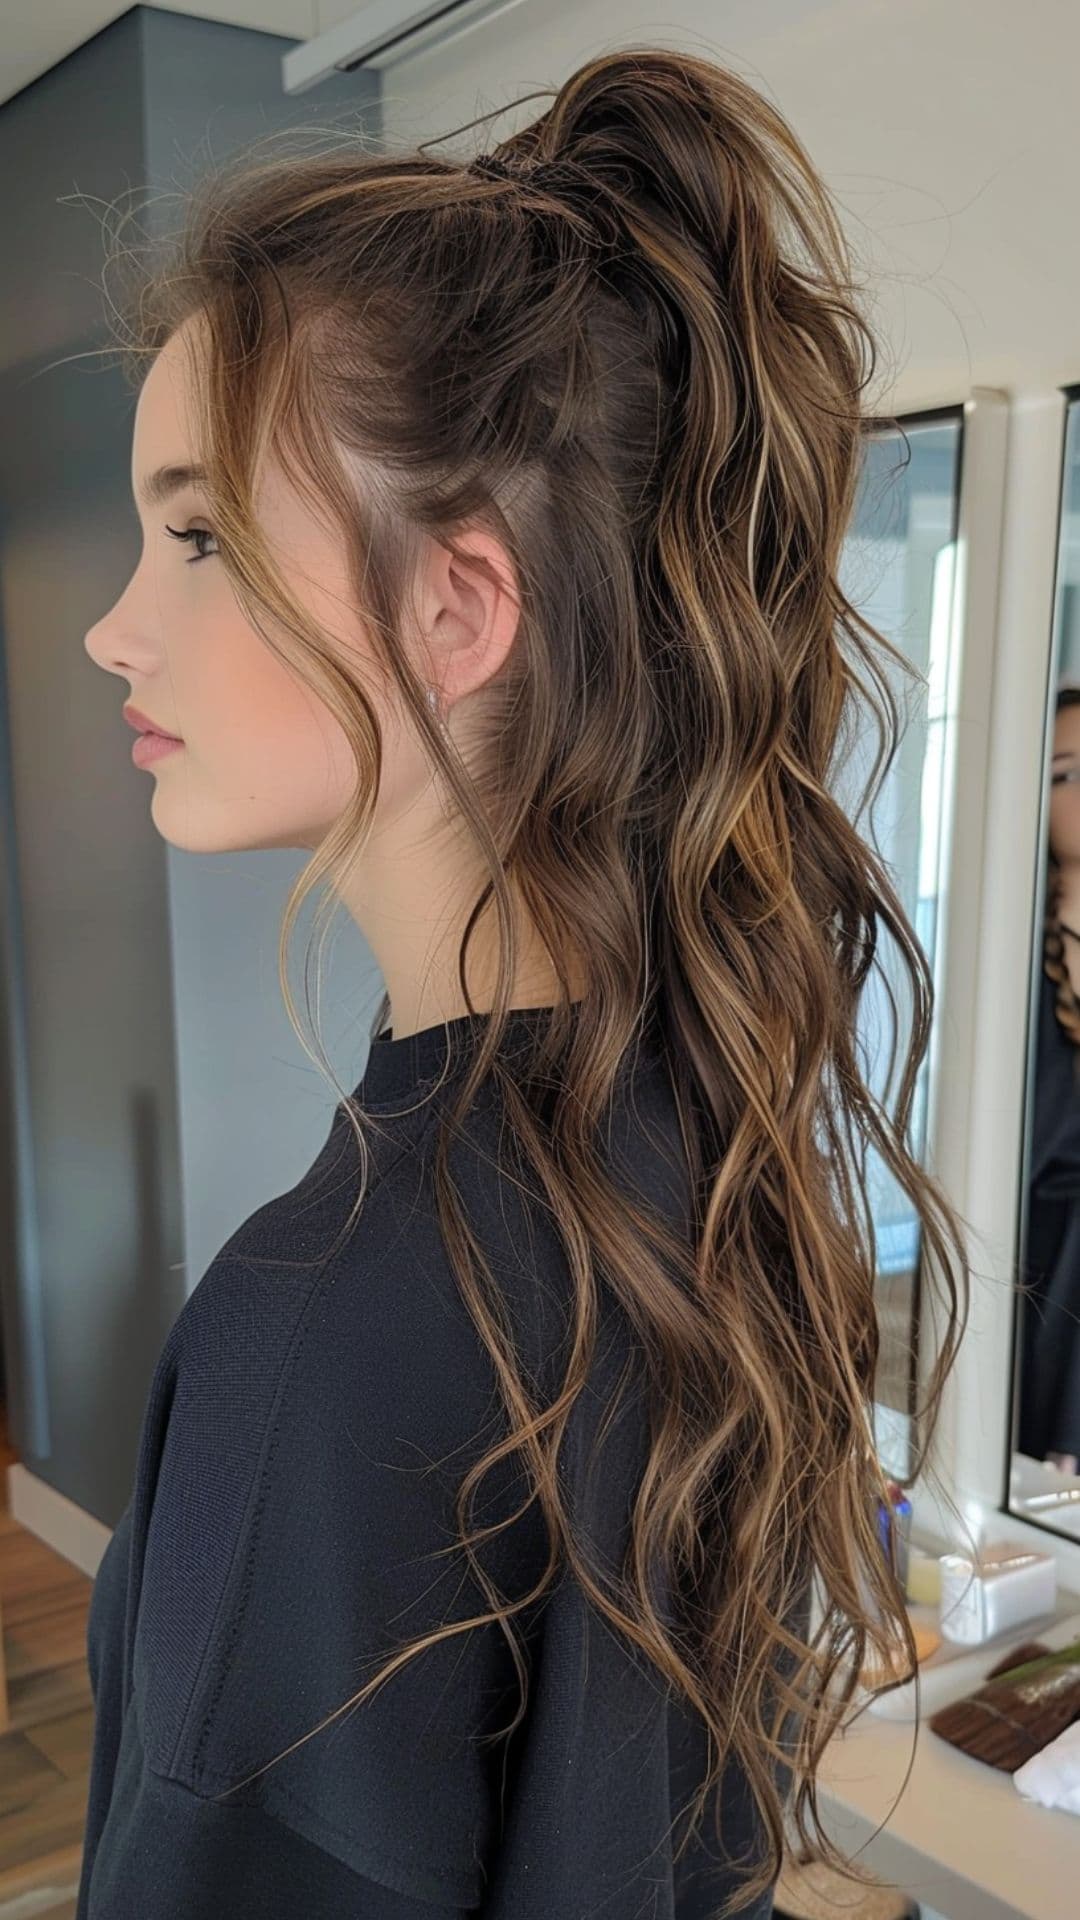 A woman modelling a half-up ponytail.